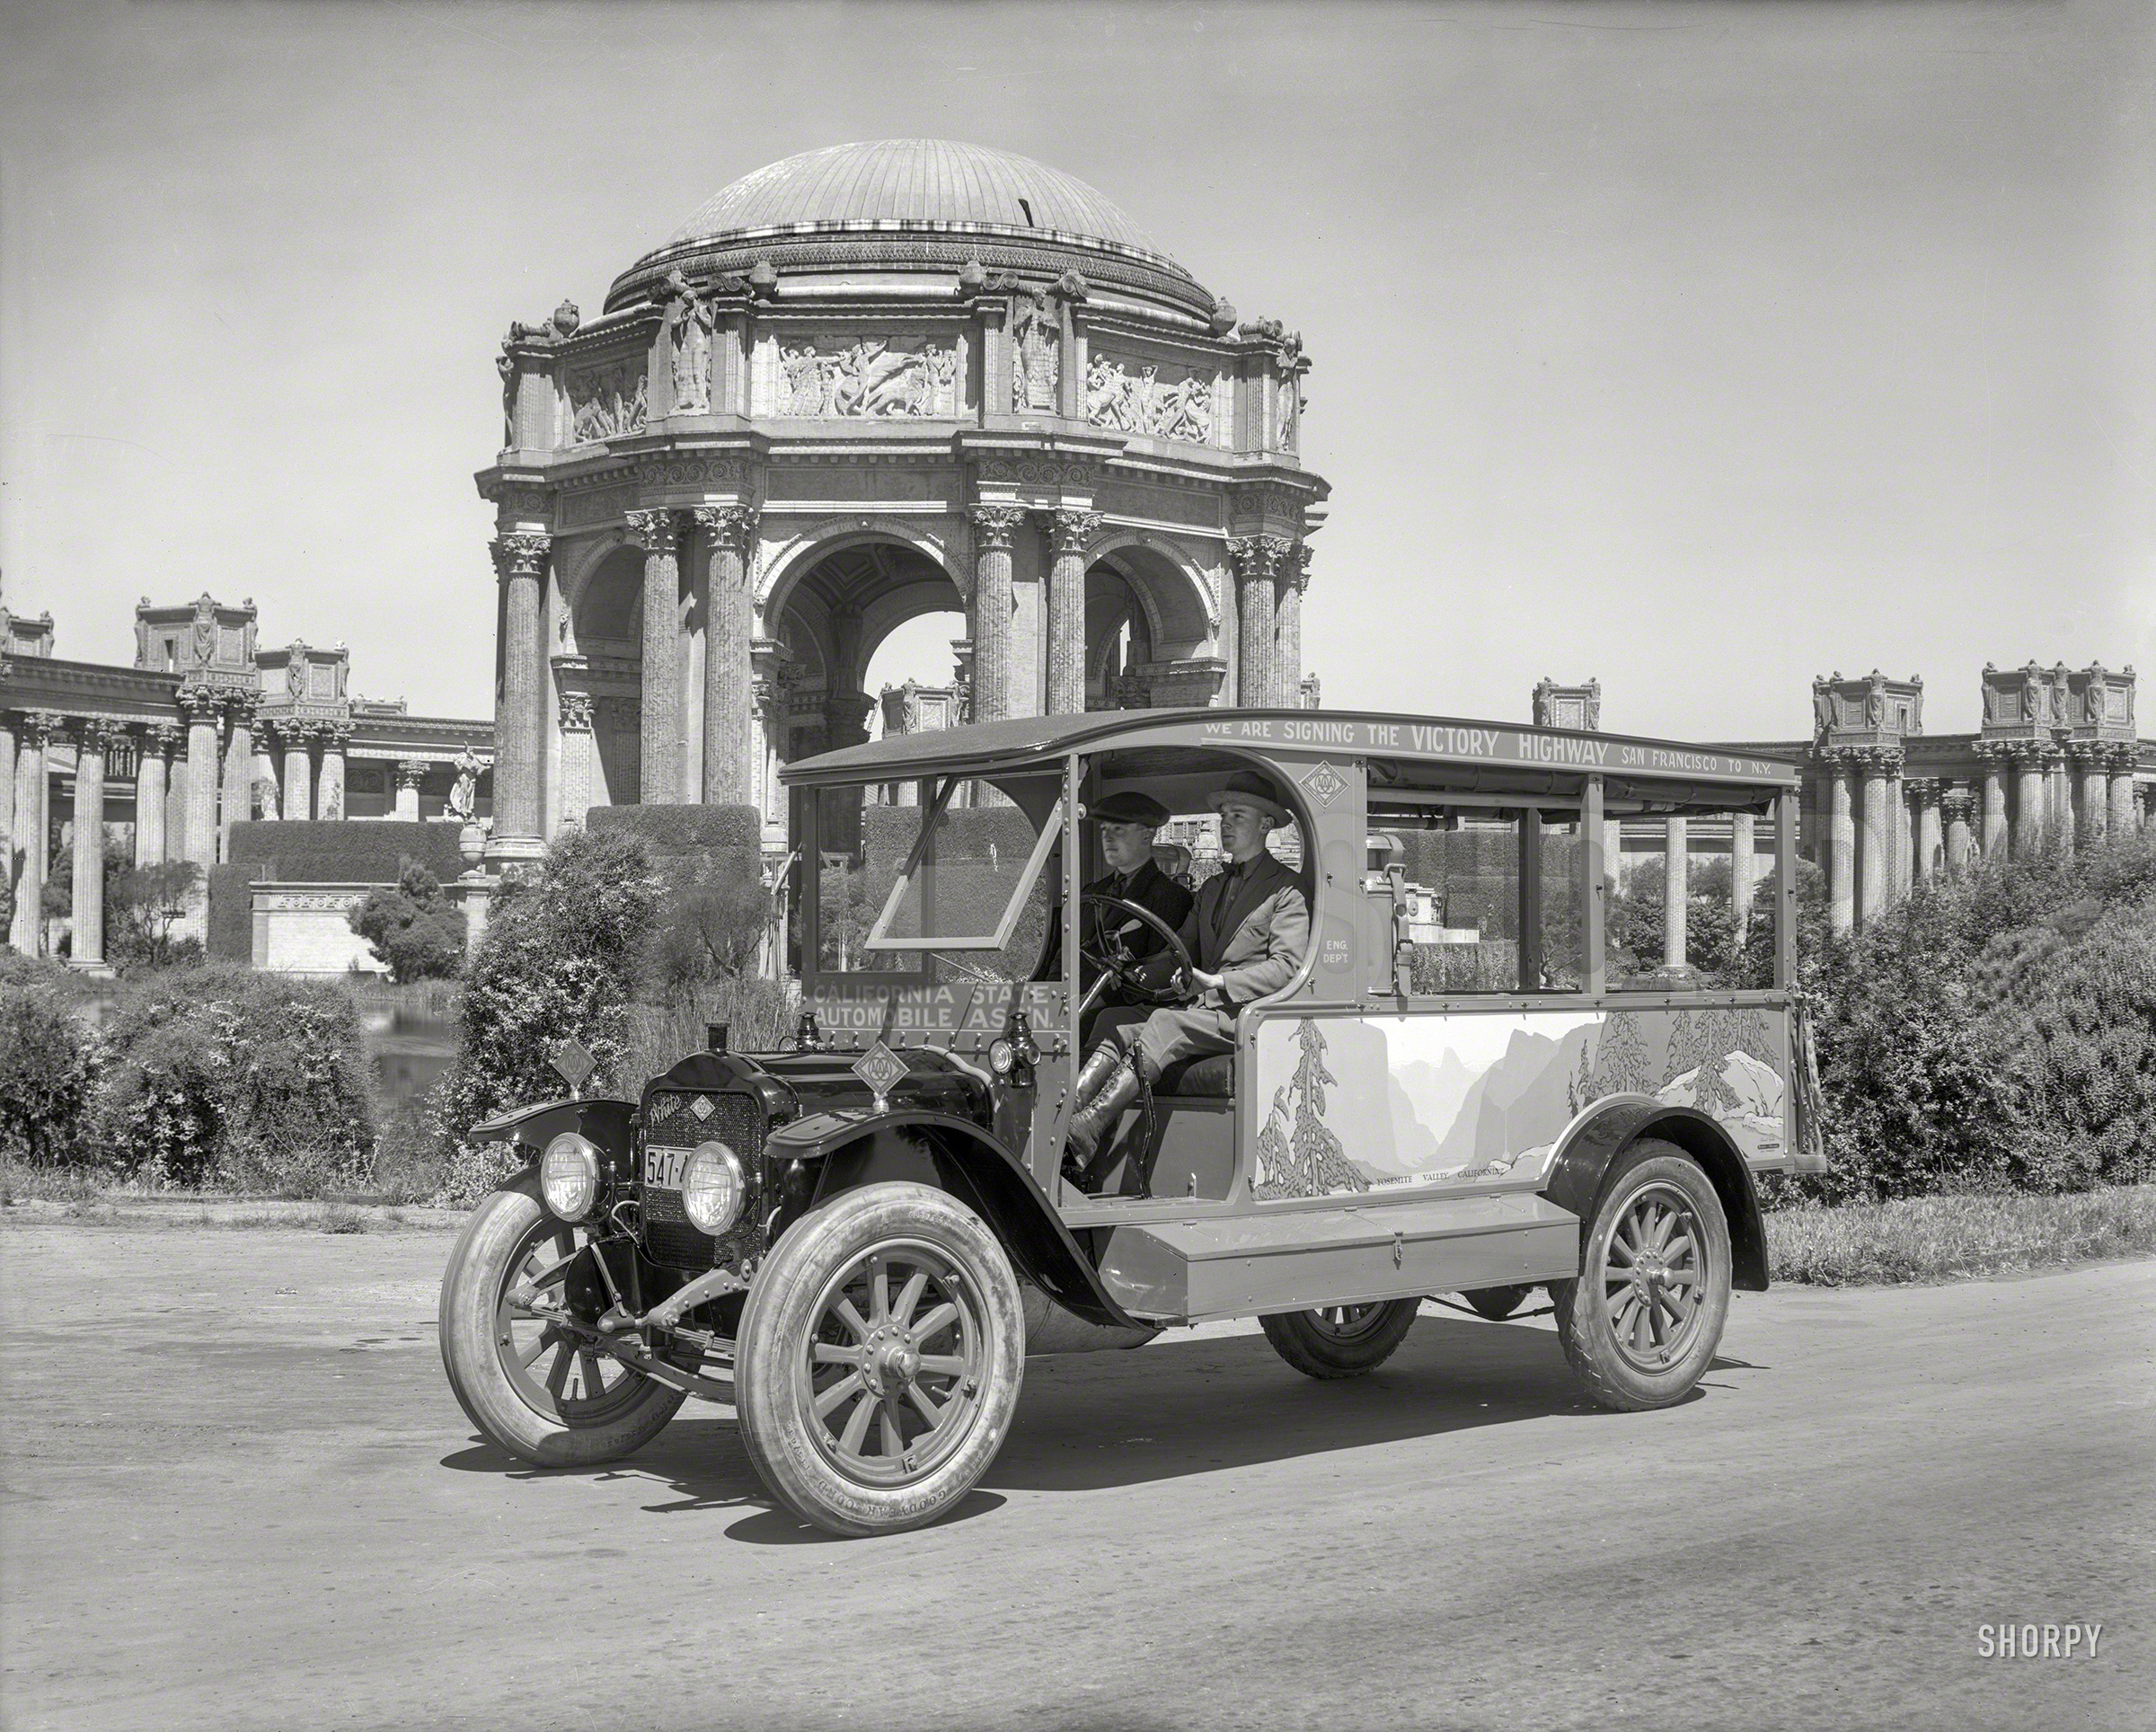 &nbsp; &nbsp; &nbsp; &nbsp; "We are signing the Victory Highway, San Francisco to N.Y."
San Francisco circa 1921. "White motor truck at Palace of Fine Arts -- California State Automobile Association." A project from the early days of long-distance motor travel, when auto clubs took the lead in establishing and marking routes between cities and across the country. 8x10 inch glass negative, formerly of the Wyland Stanley and Marilyn Blaisdell collections. View full size.